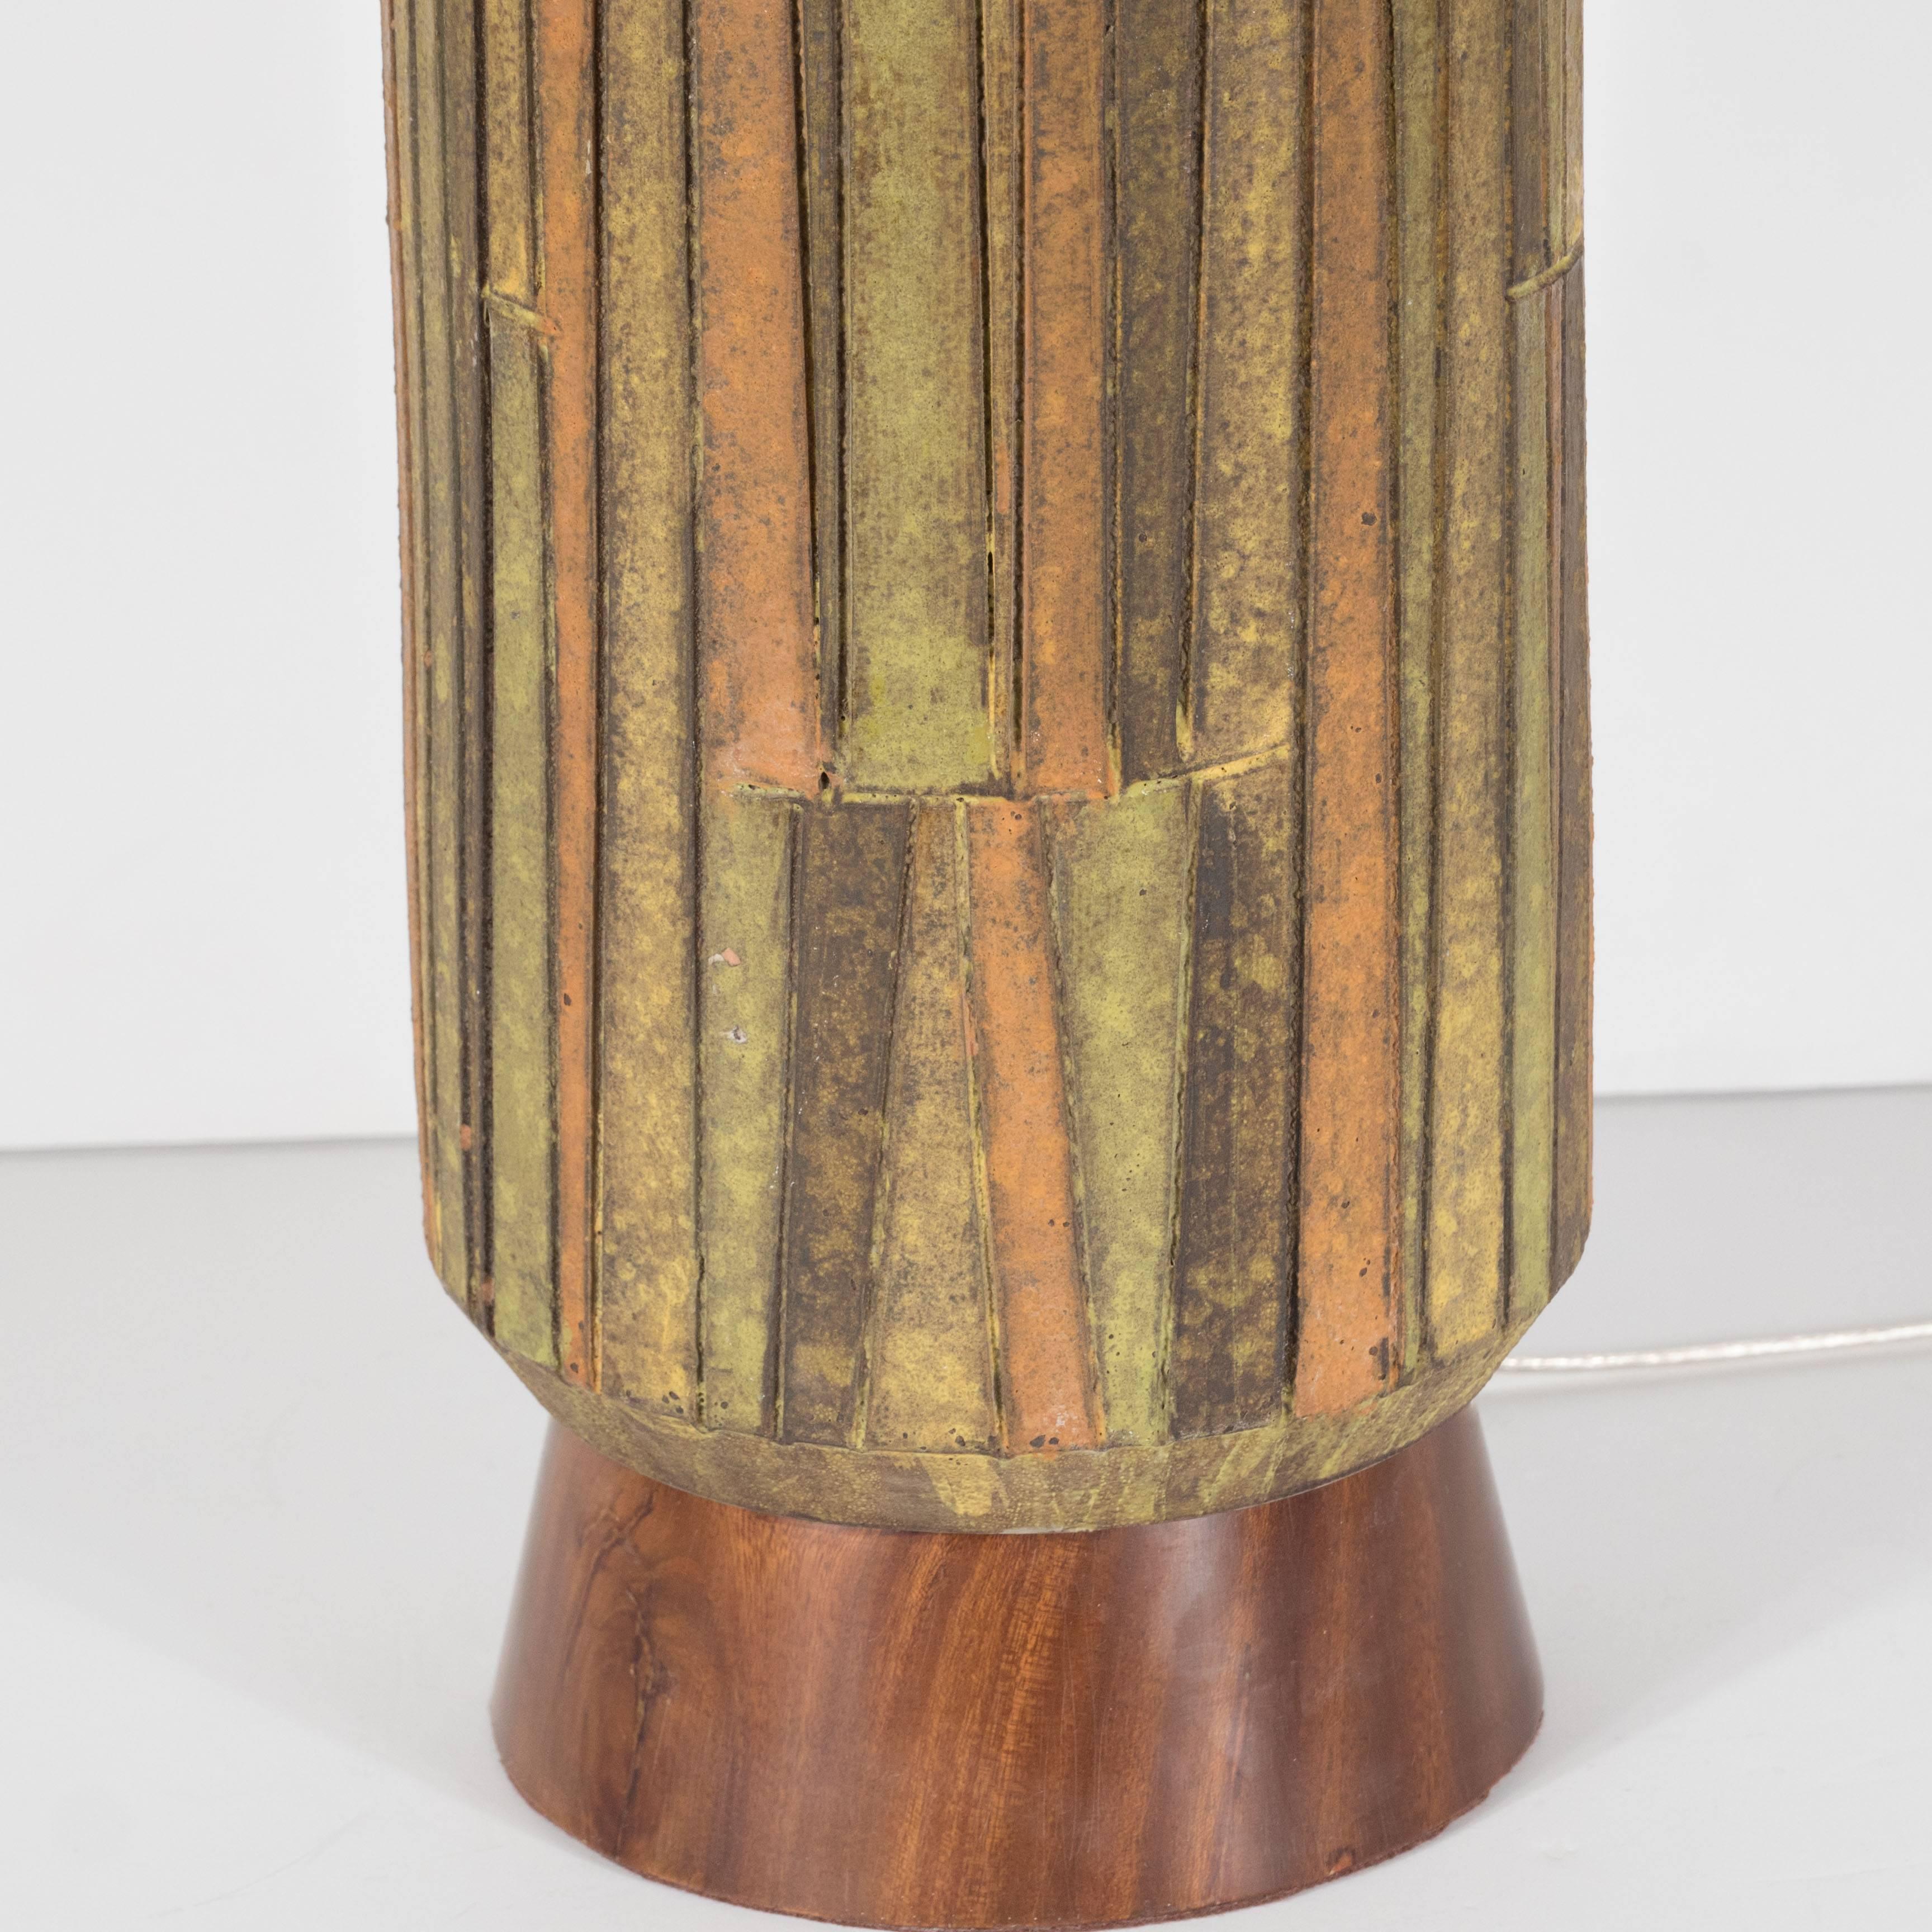 This Mid-Century Modernist earth-toned ceramic and walnut table lamp was designed by Aldo Londi and handmade in Italy by the esteemed maker Bitossi for Raymond, circa 1960. A subtly conical hand-rubbed walnut base supports a ceramic body composed a